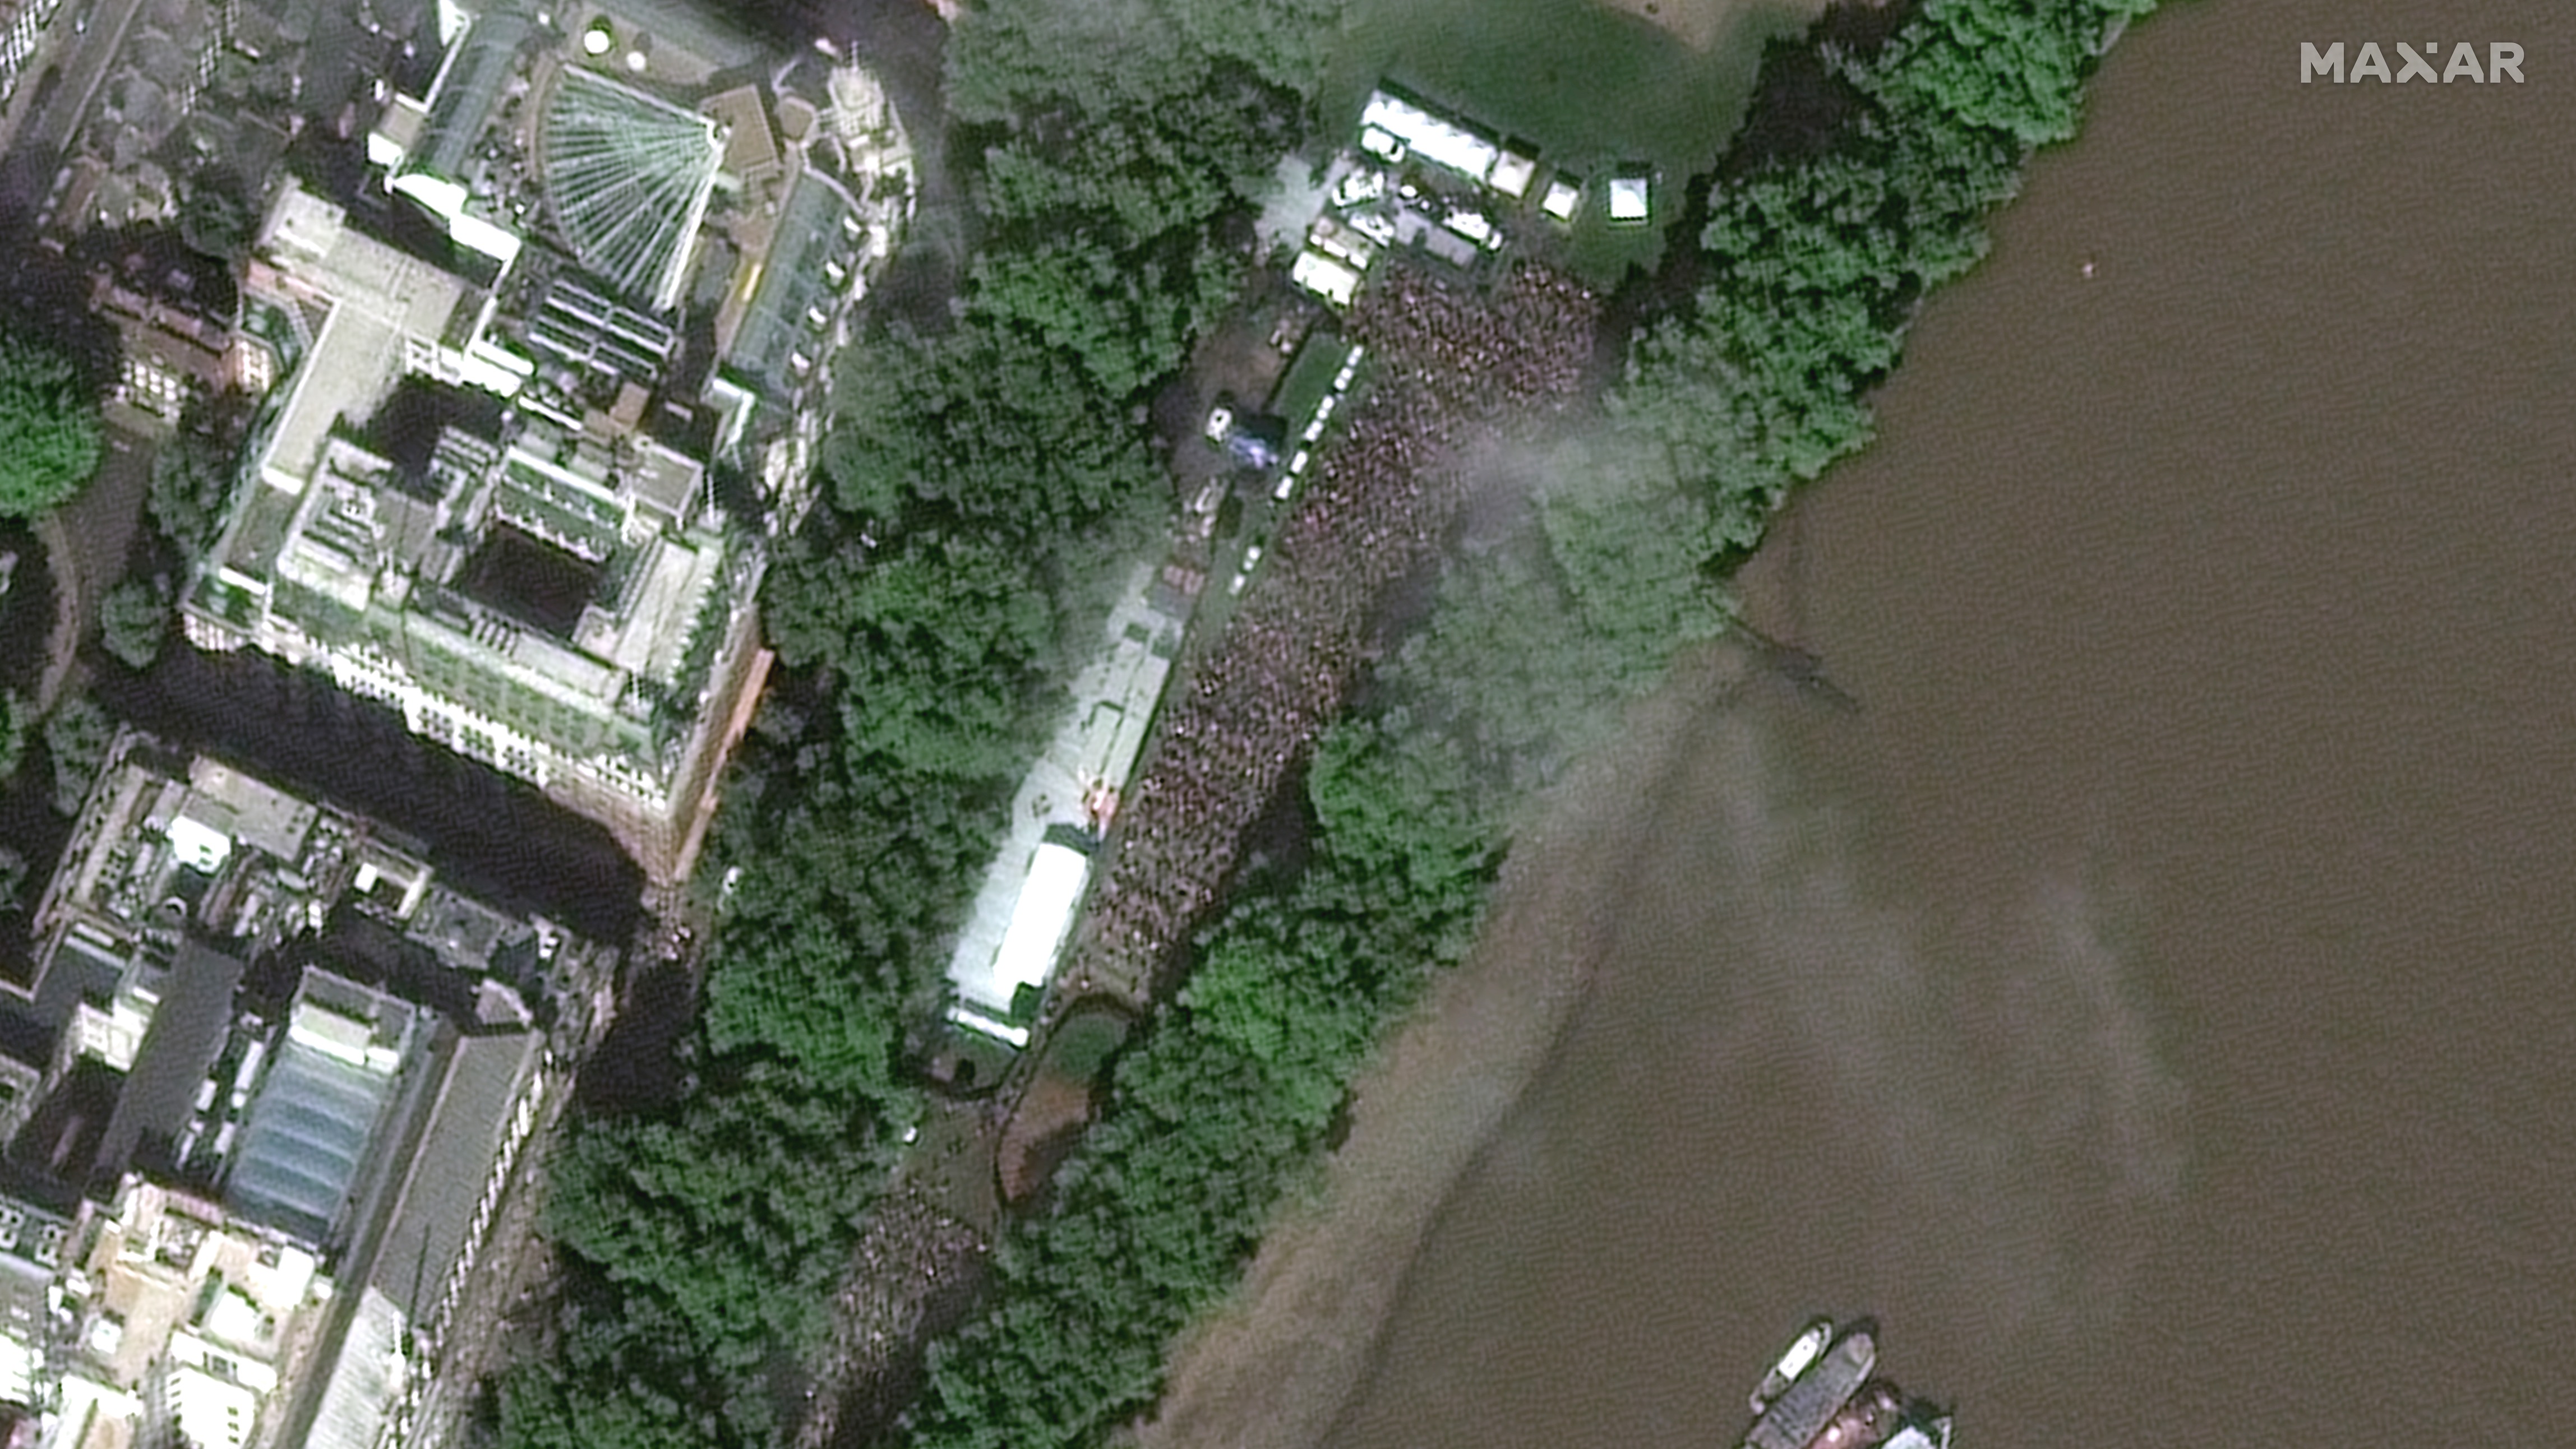 view of crowds seen in a satellite image